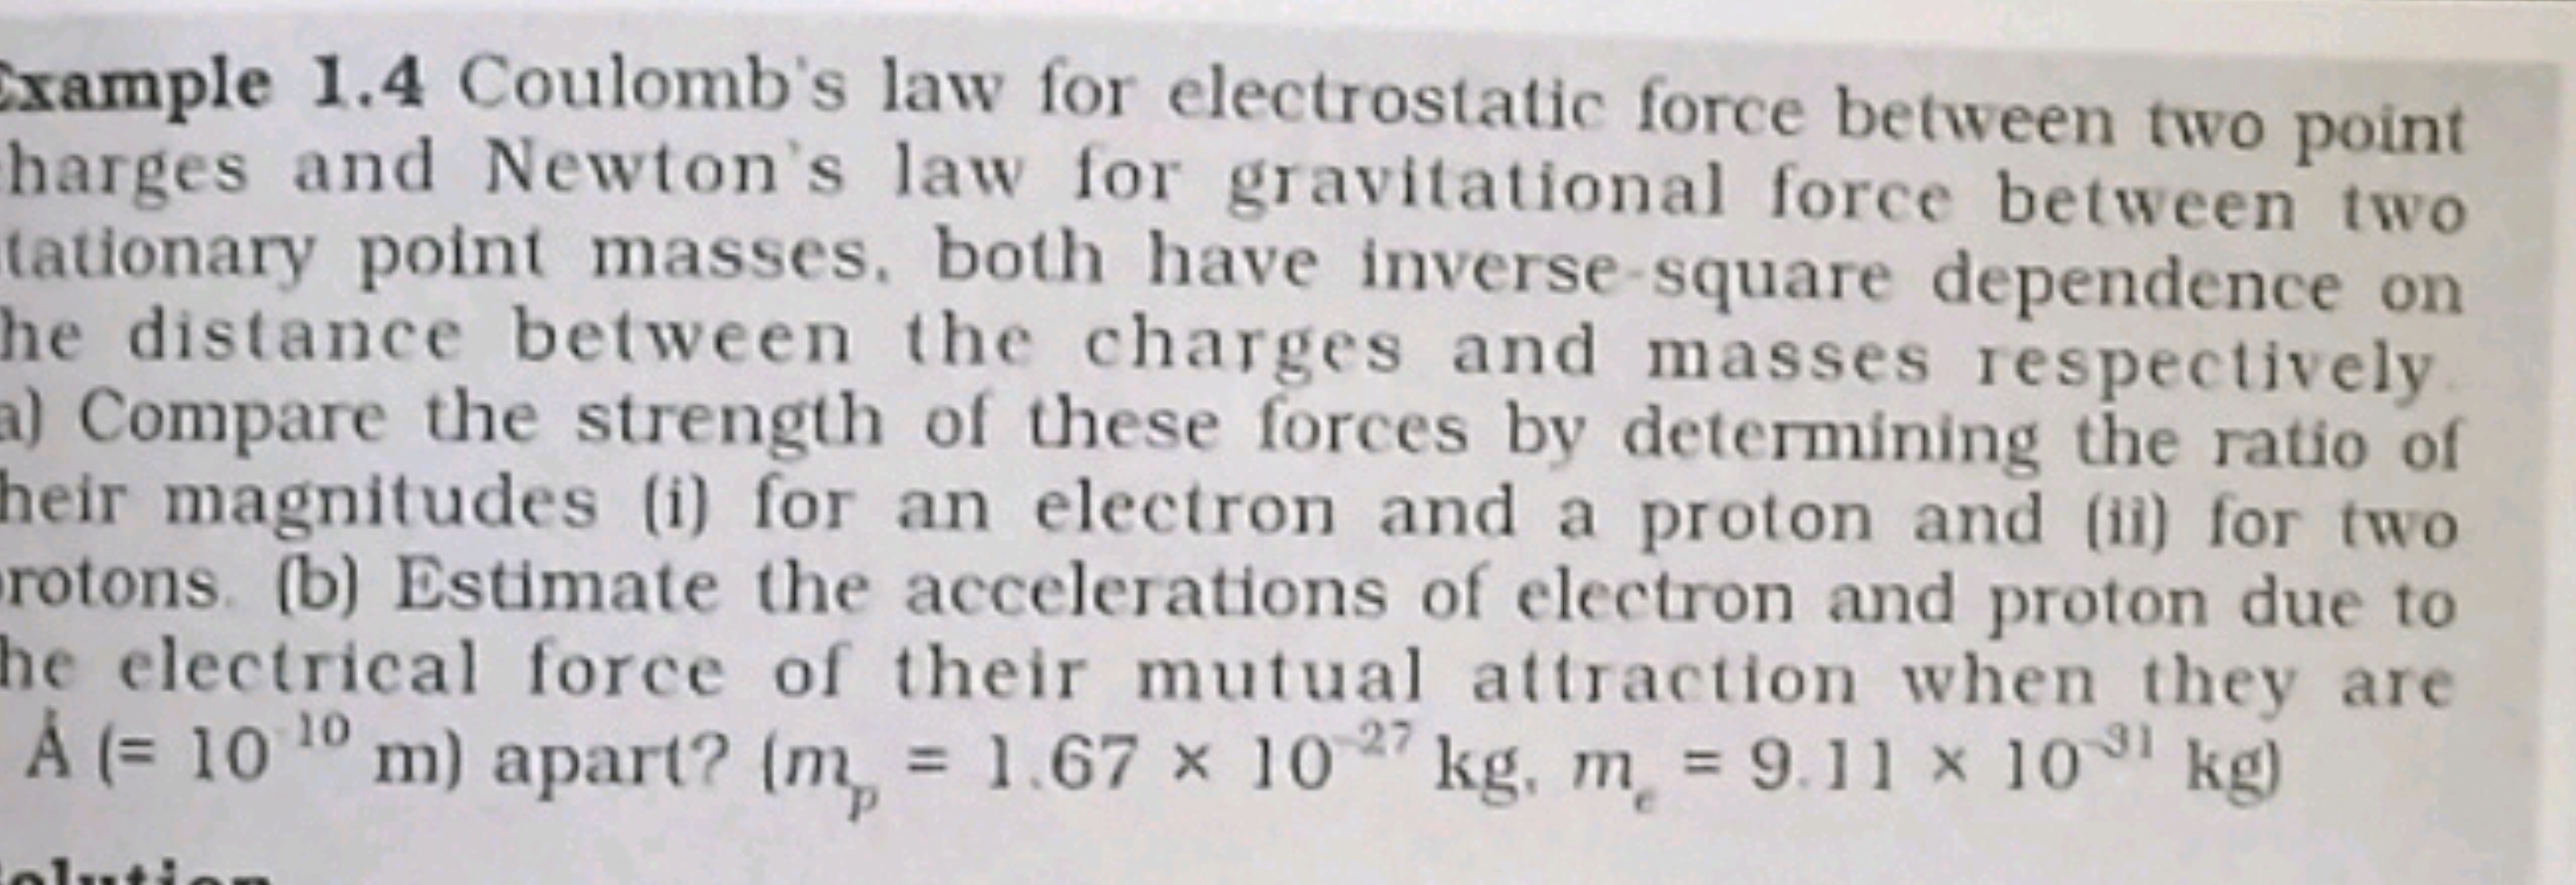 xample 1.4 Coulomb's law for electrostatic force between two point har